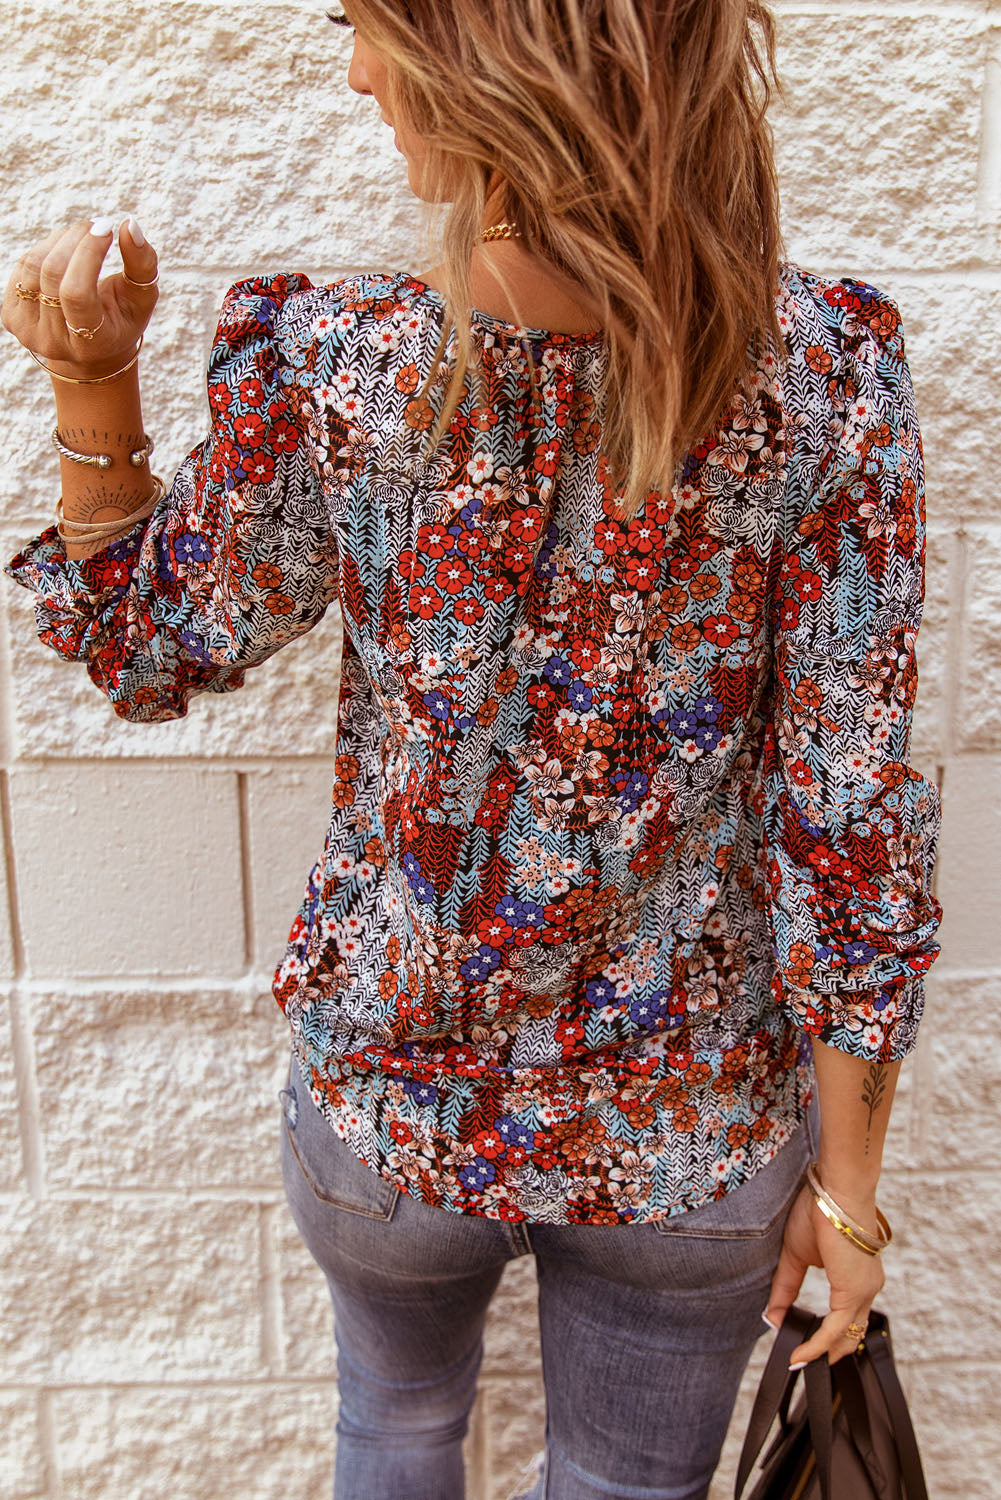 Flounced Tie-Neck Top with Printed Design